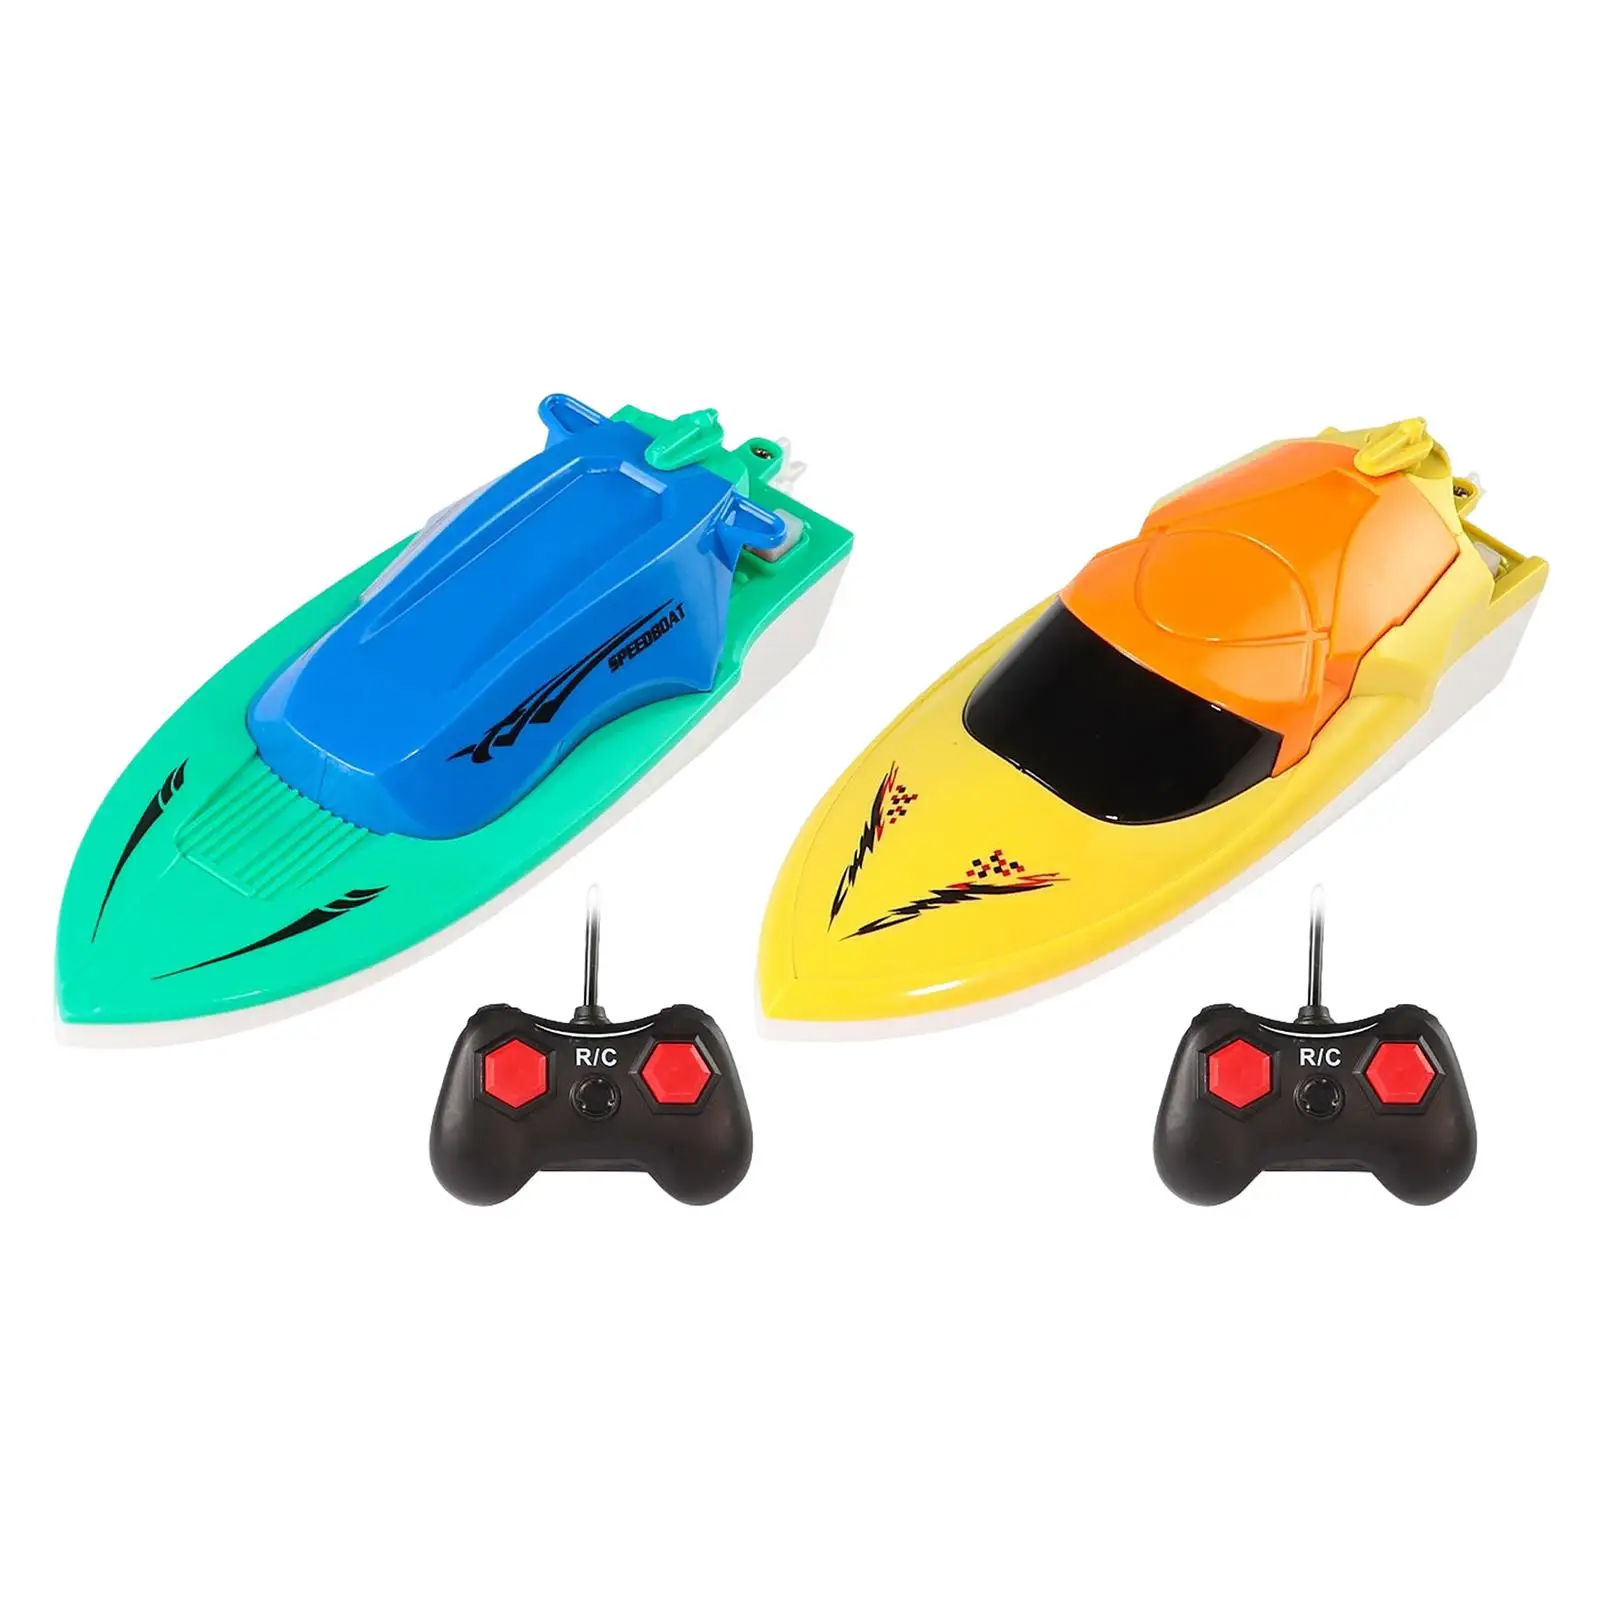 Mini Racing Boat Toy with Remote Control , Easily Forward, Reverse, Turn Left, and Turn Right Anti Collision Body Sturdy Durable